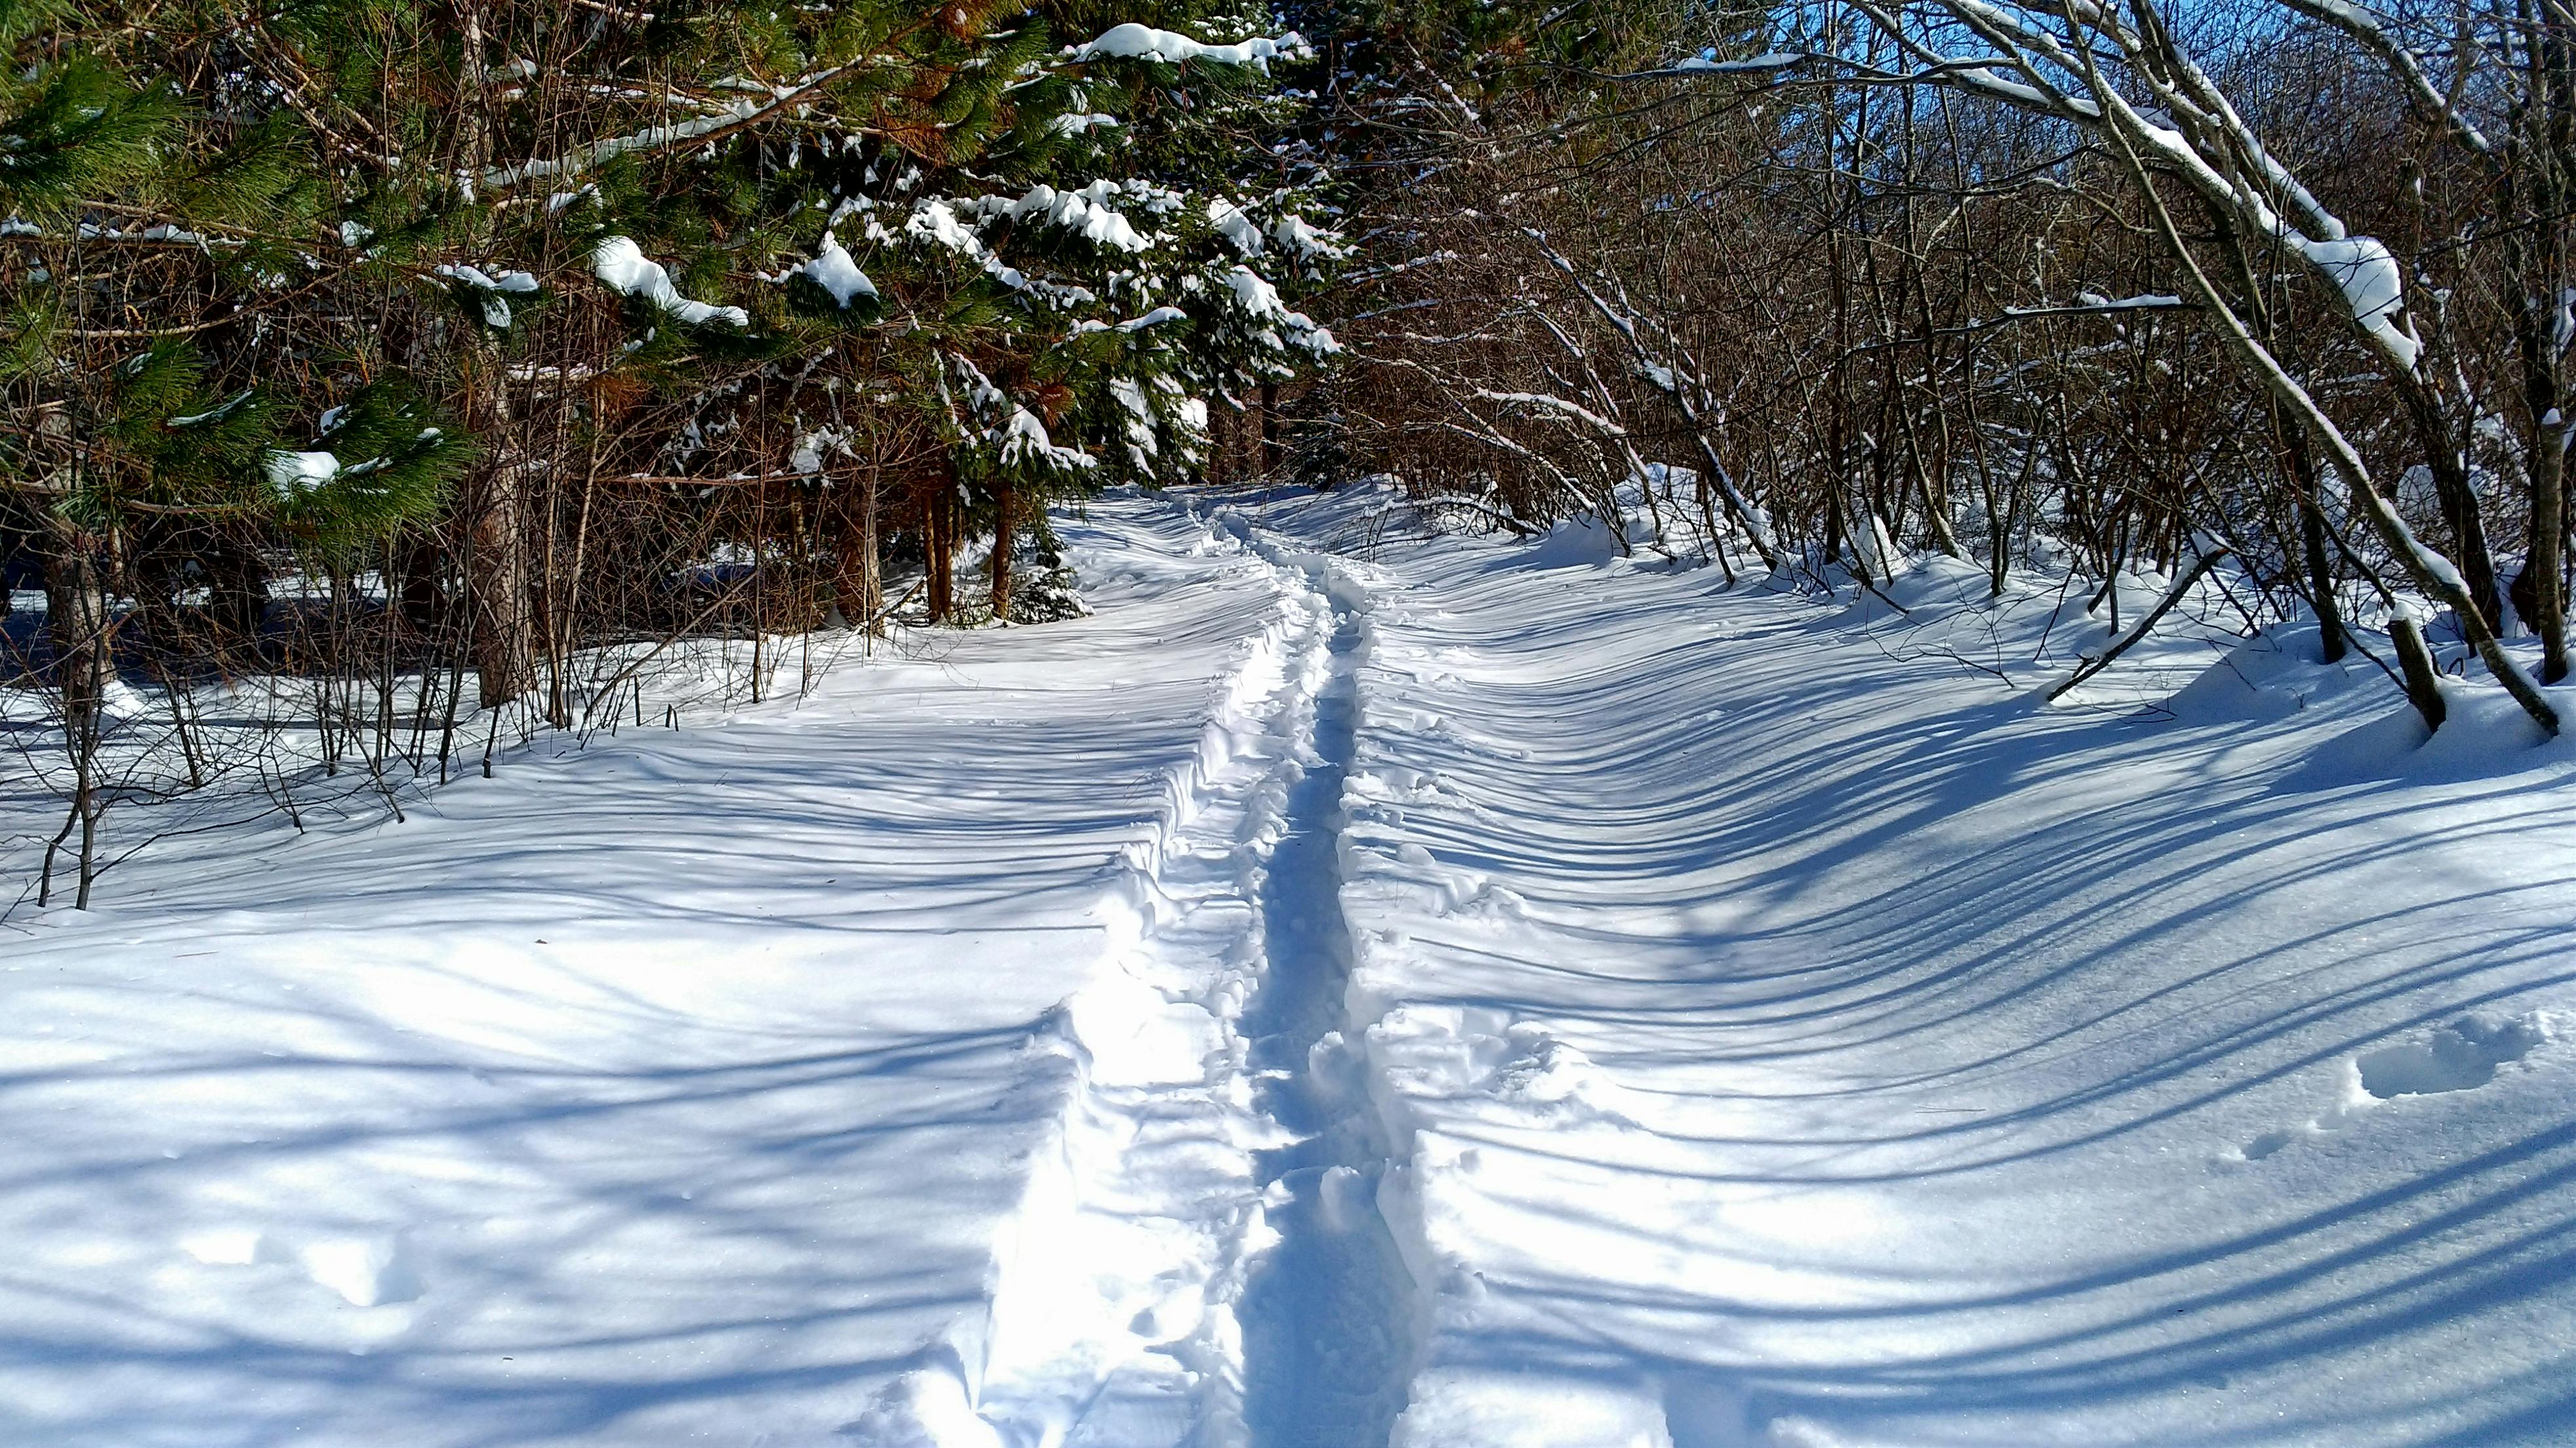 Free stock photo of Winter Snow shoeing trail